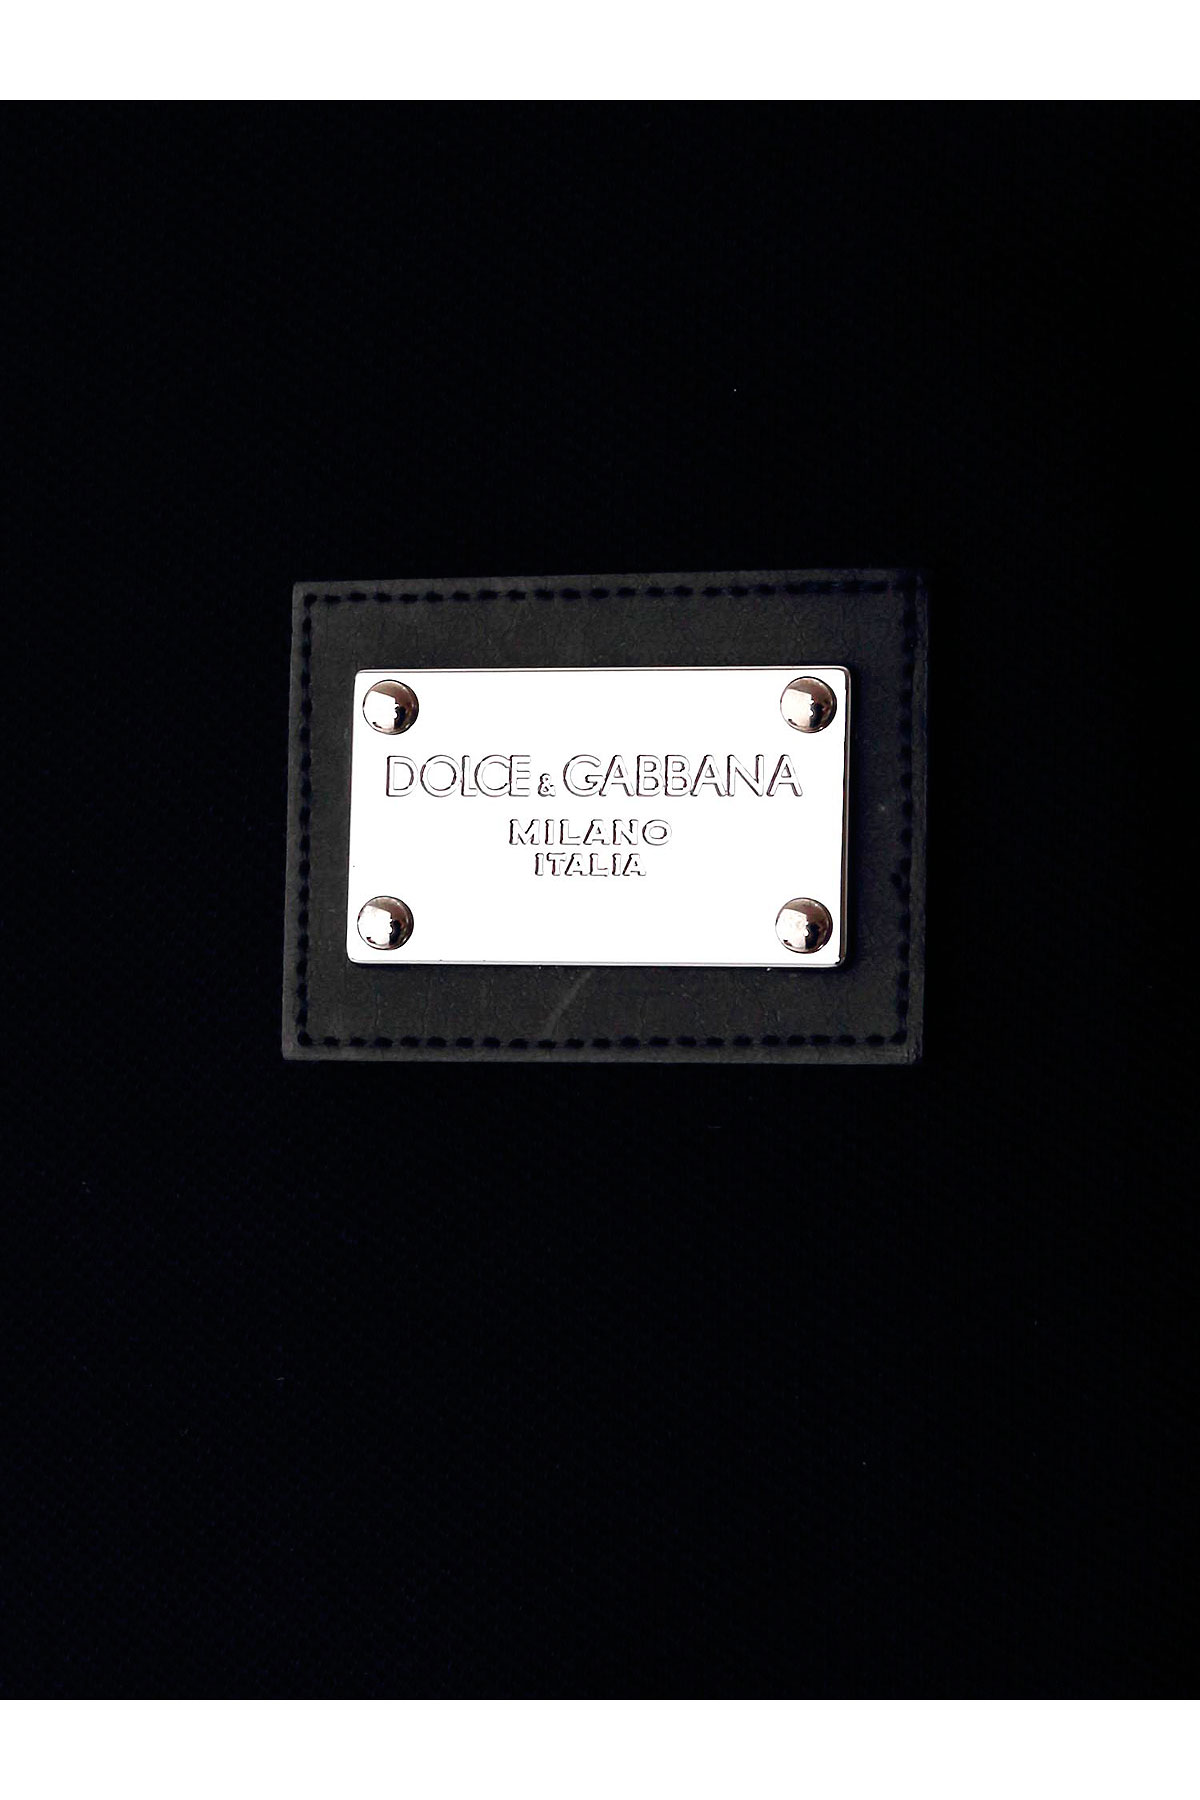 Mens Clothing Dolce & Gabbana, Style code: gxp68t-jbse2-a0227